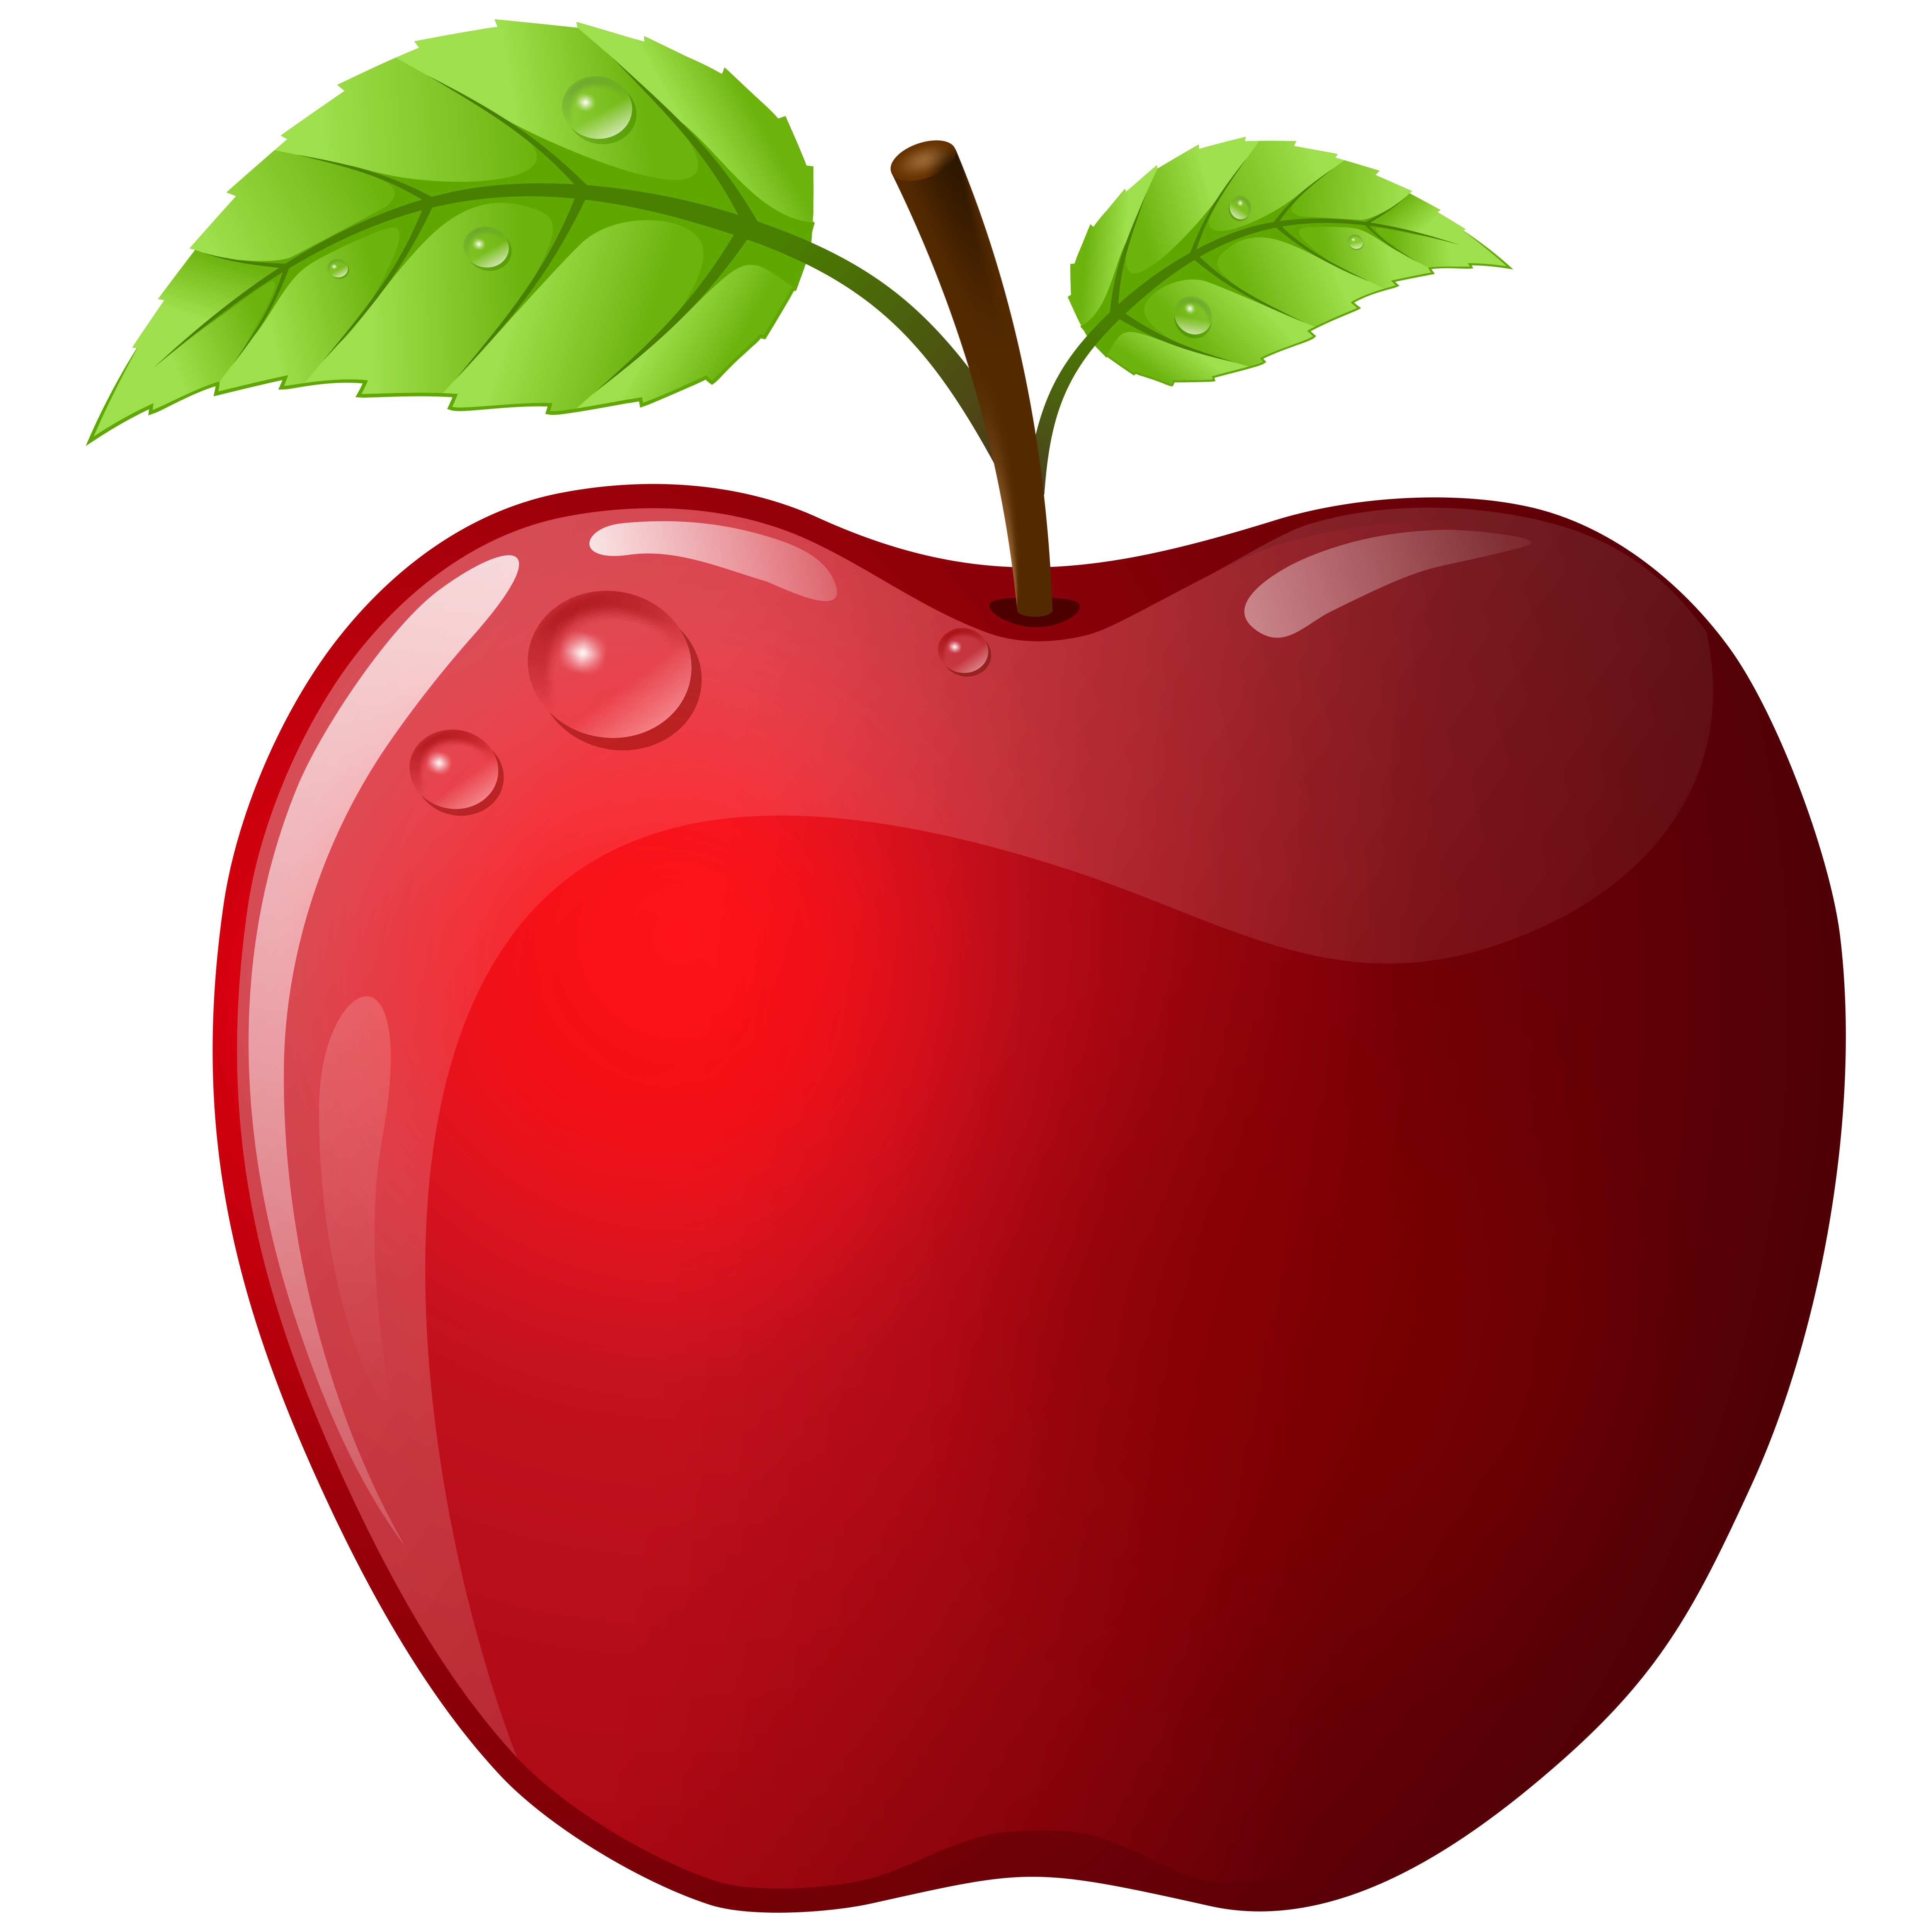 Red Apples Pictures - ClipArt Best